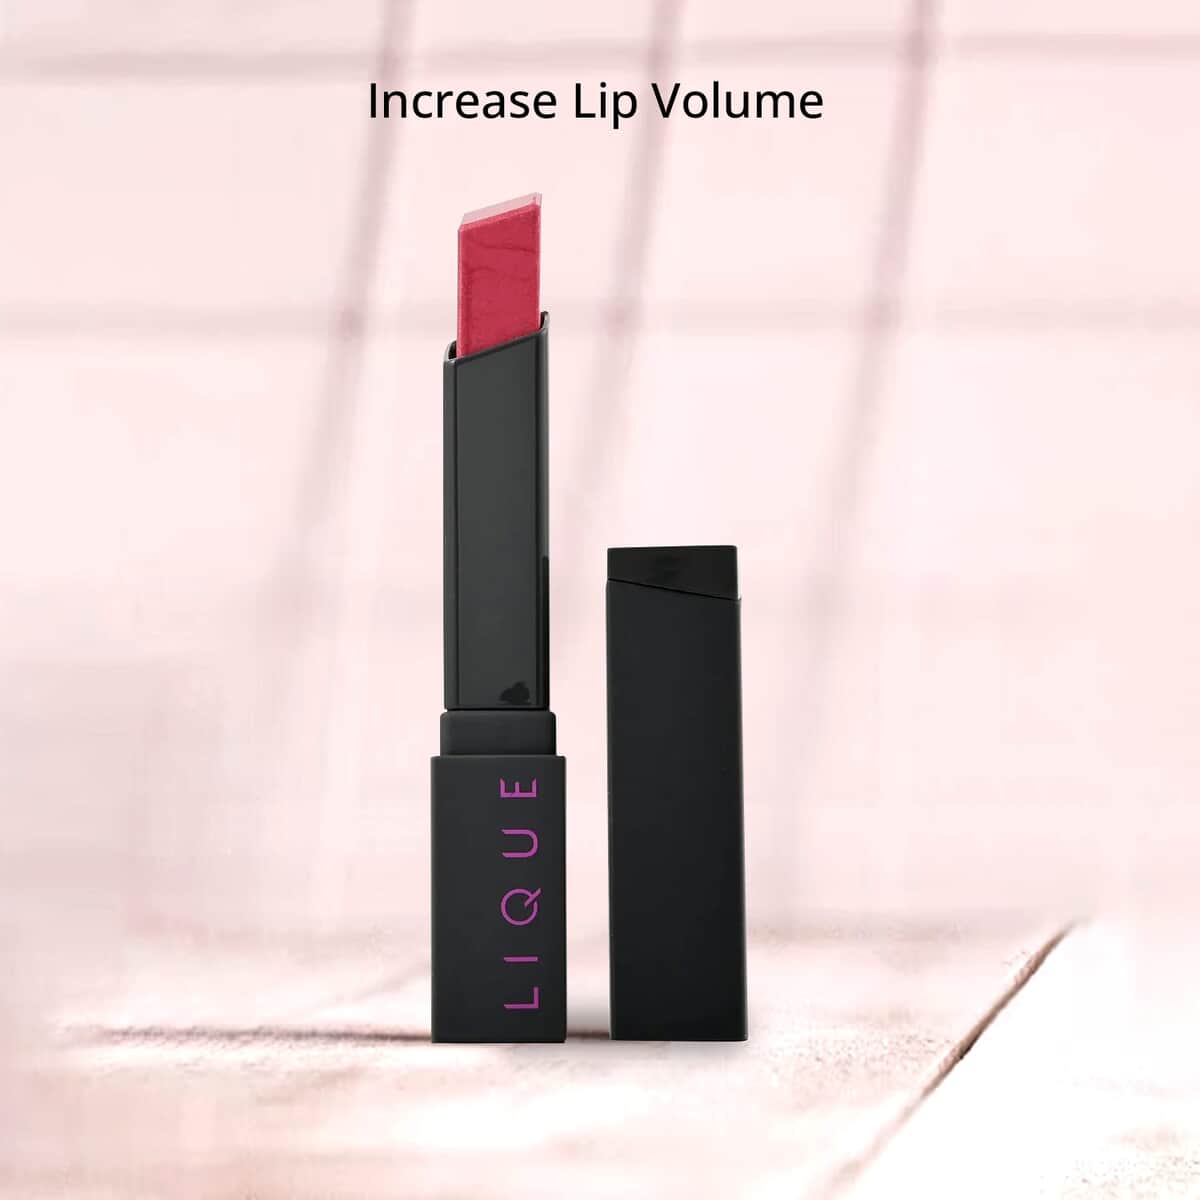 Closeout Lique Set of 2 (One Lipstick & One Effect Powder) with Free Set of 2 (One Lipstick & One Effect Powder) image number 2